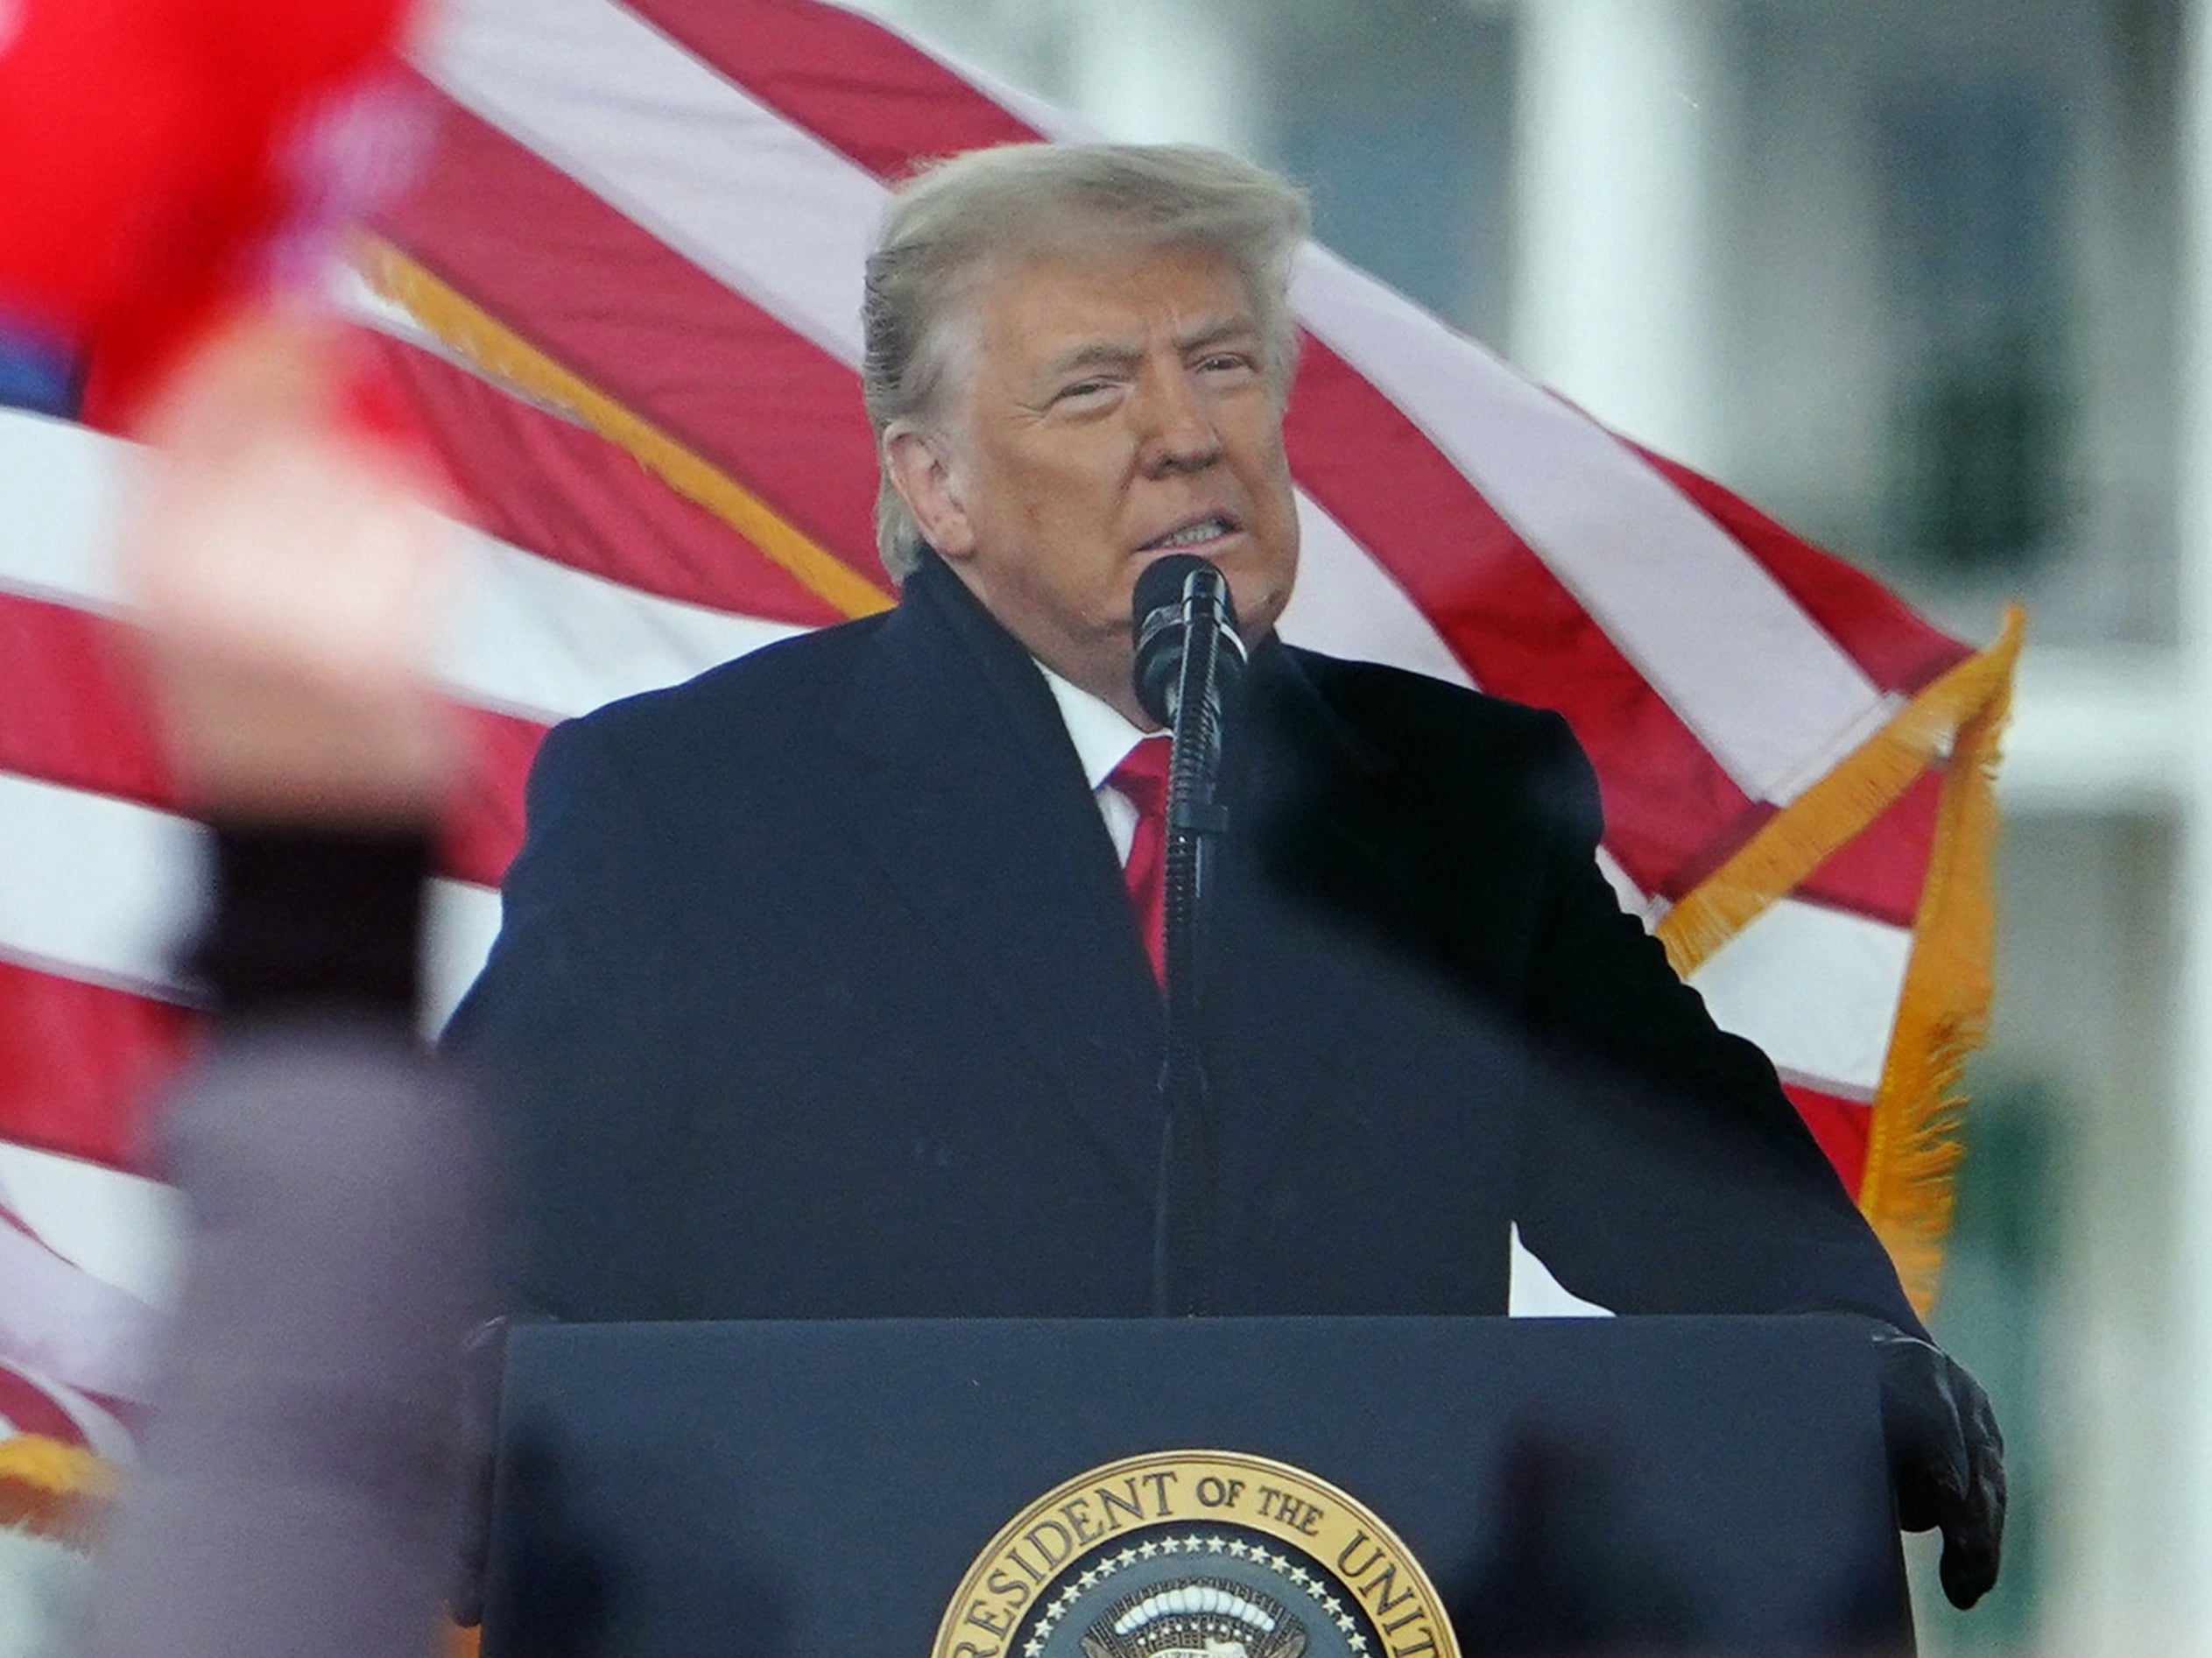 Donald Trump speaks outside the White House on 6 January 2021